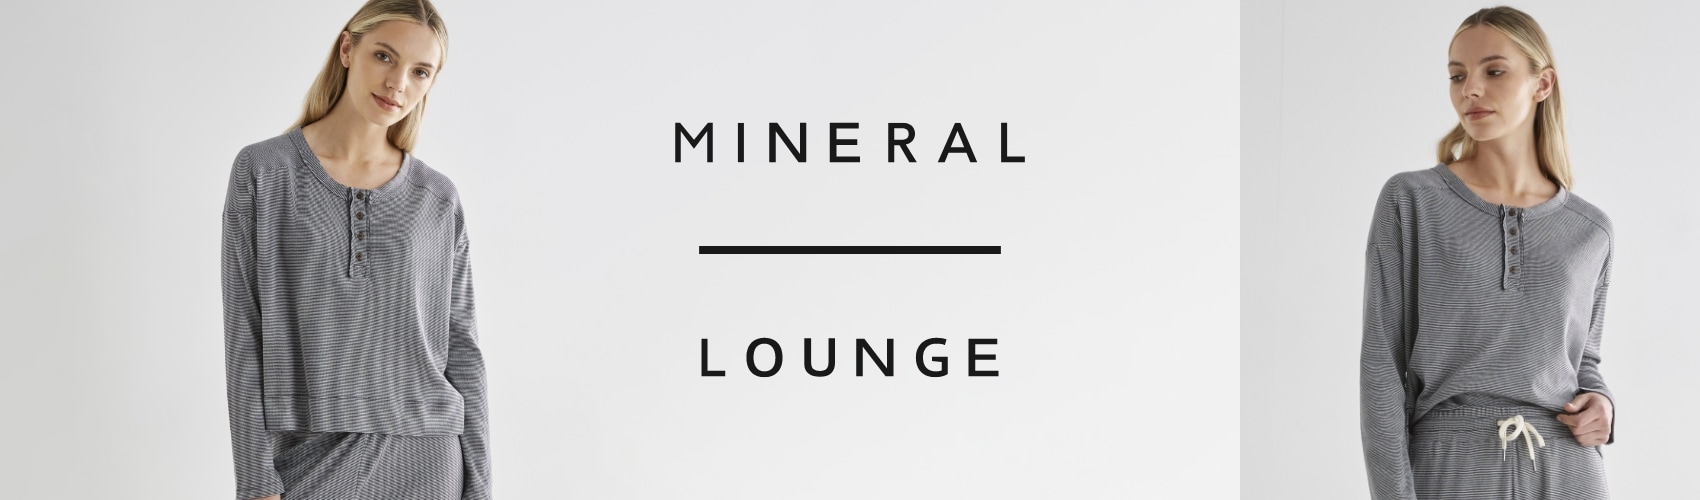 Mineral lounge